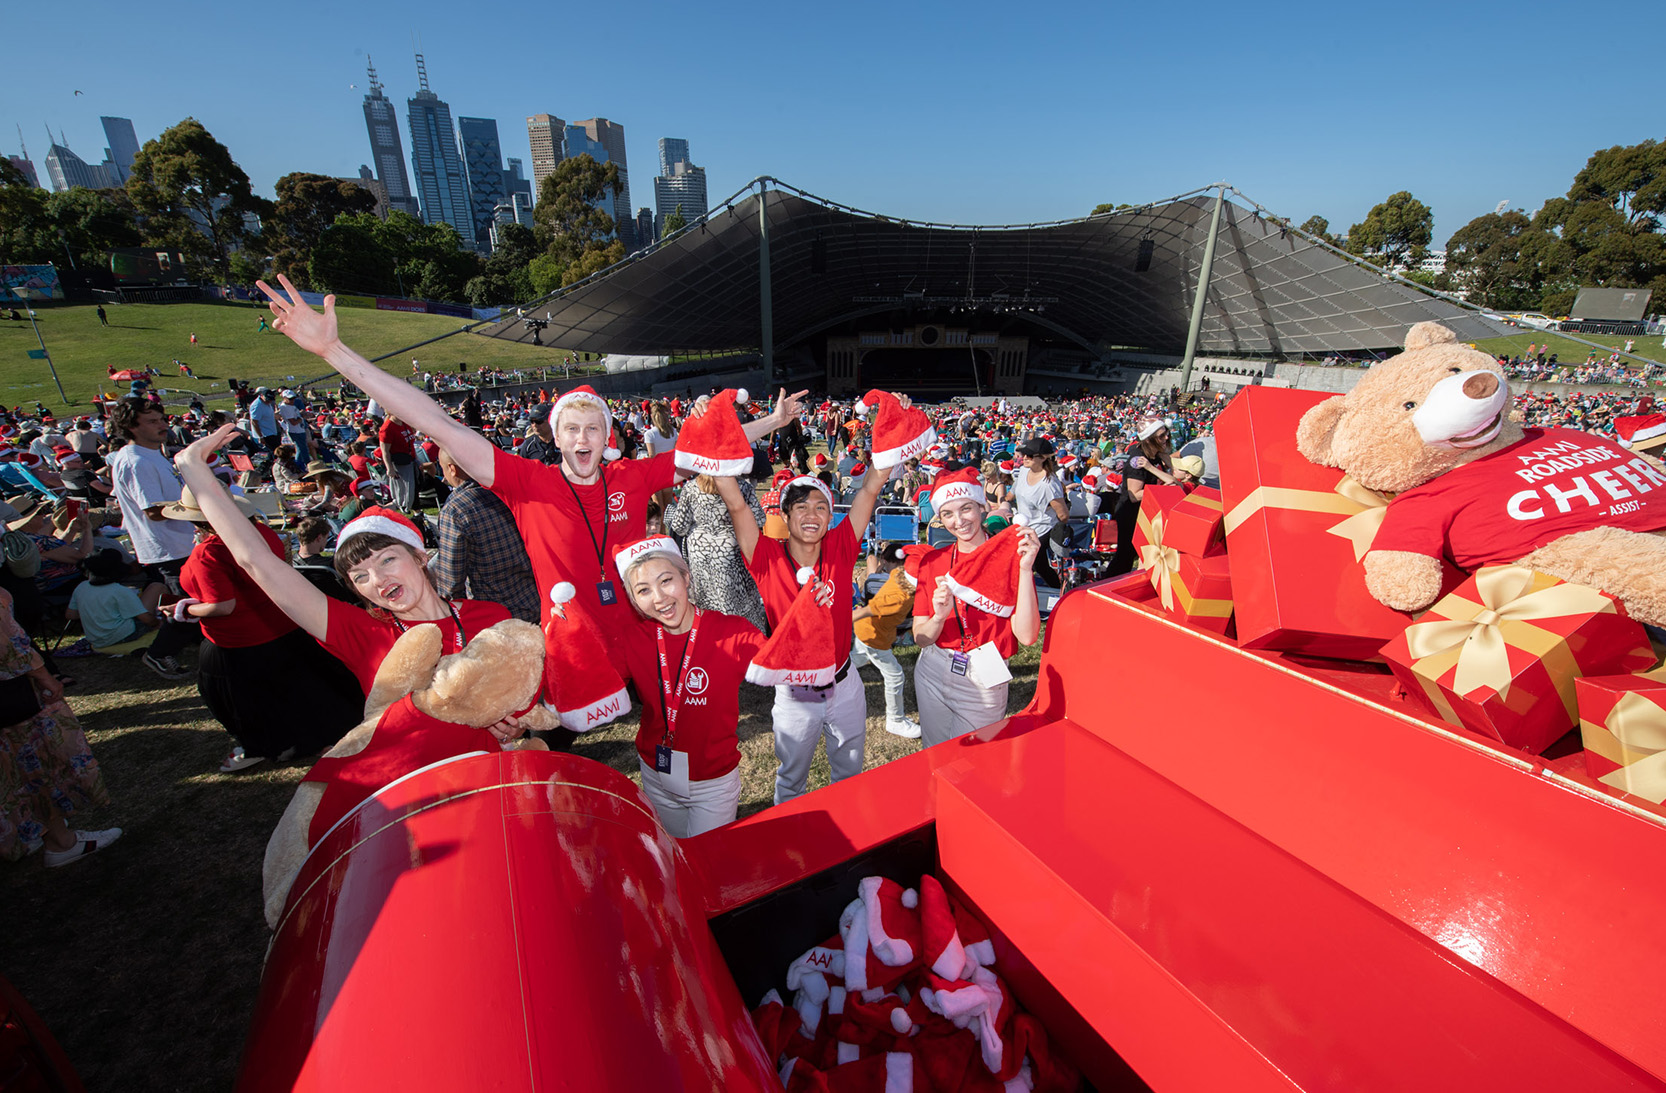 AAMI Cheer Van and staff cheering with the Carols crowd and stage behind them